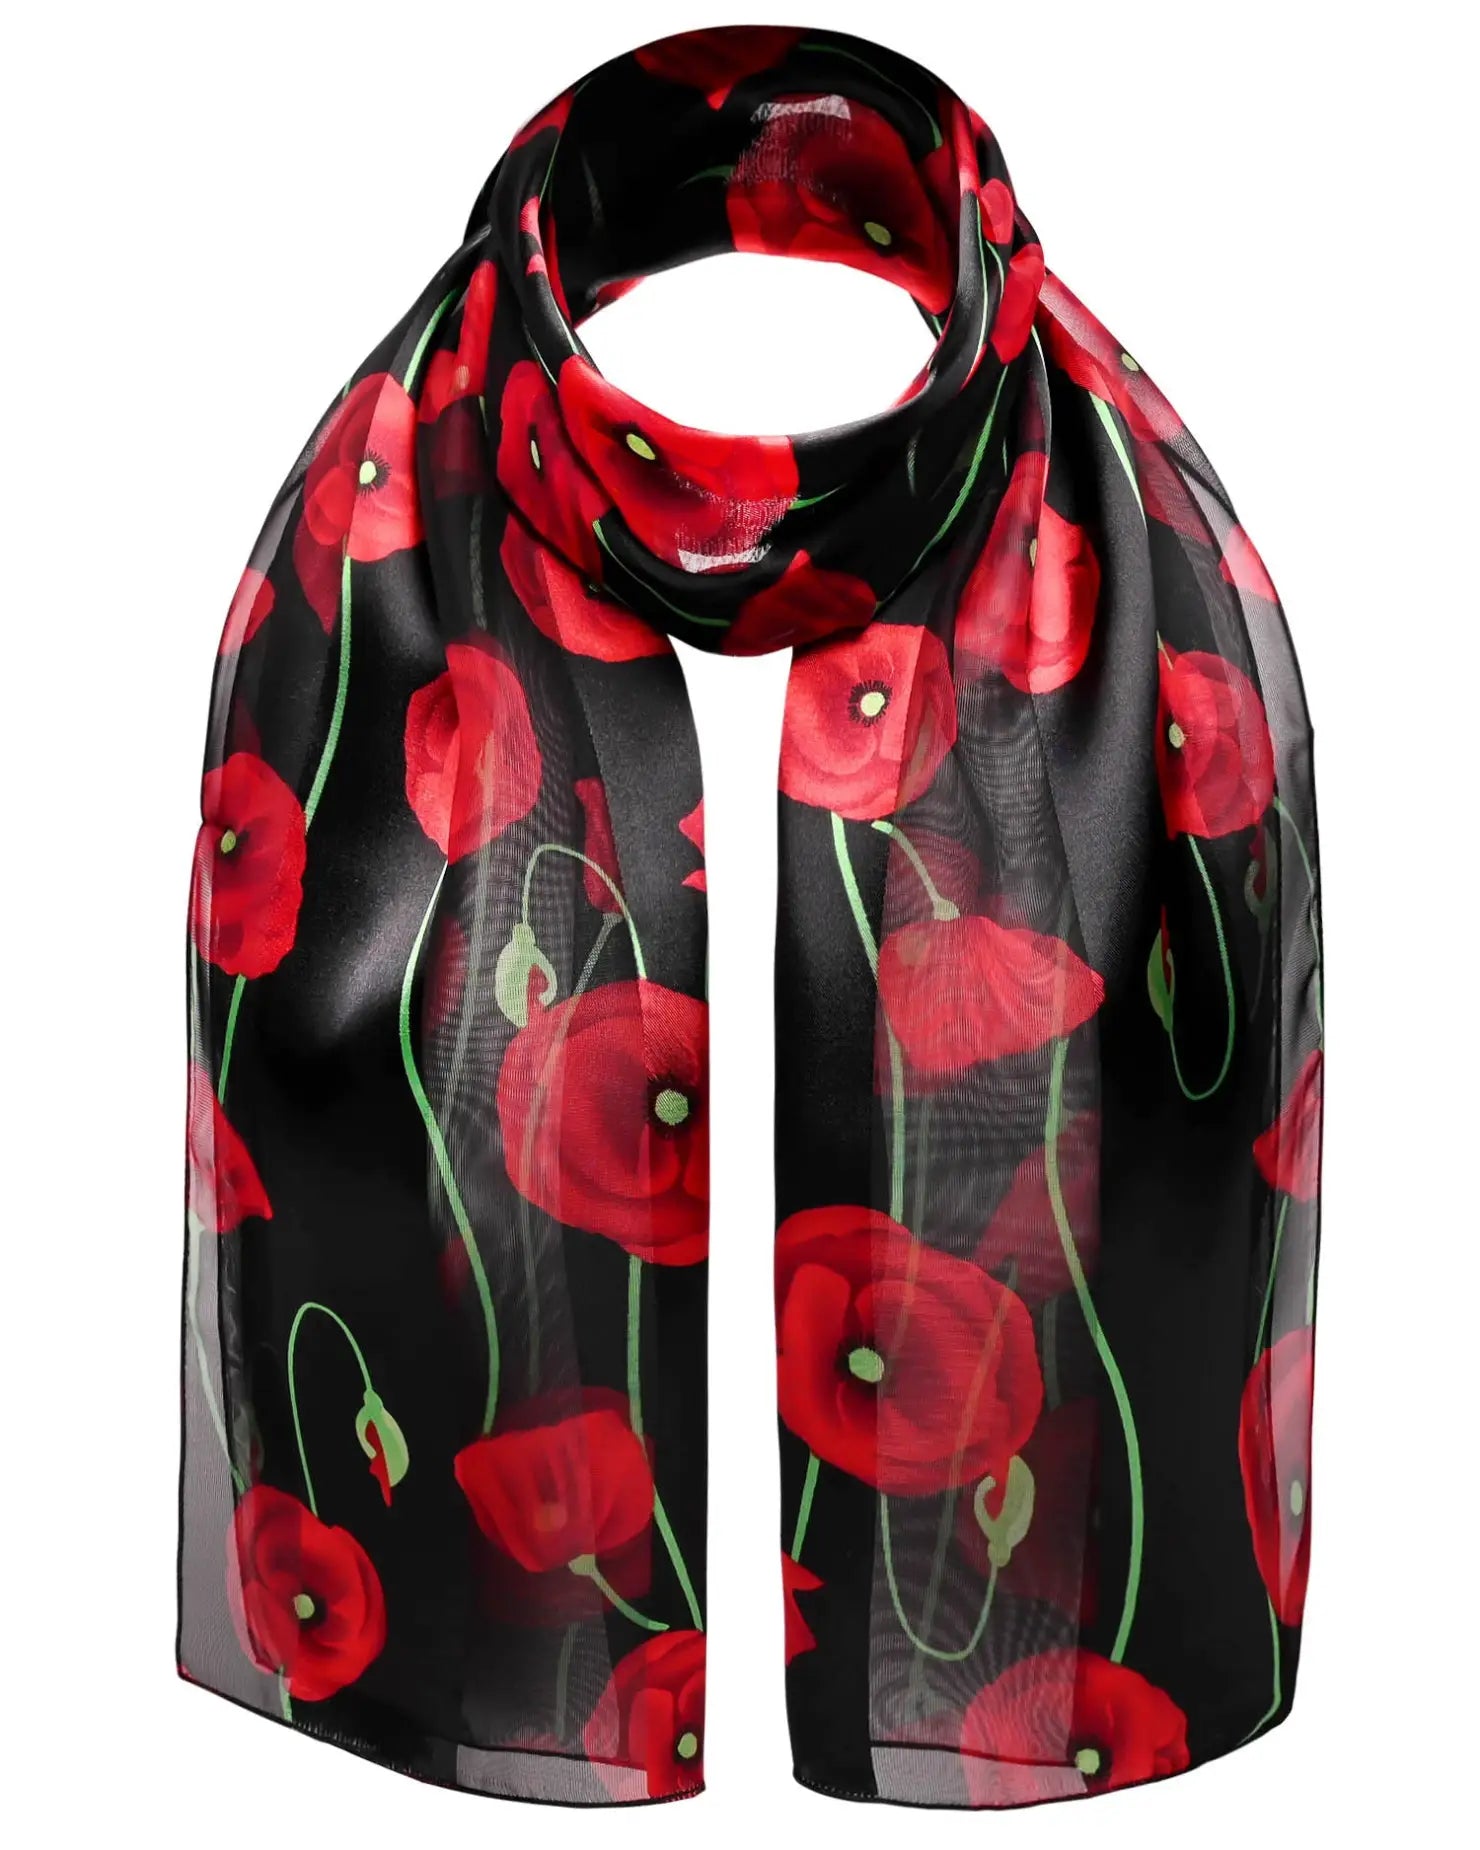 Black and red poppy floral print scarf with gold plated ring from Poppy Floral Print Scarf & Gold Plated Ring Set